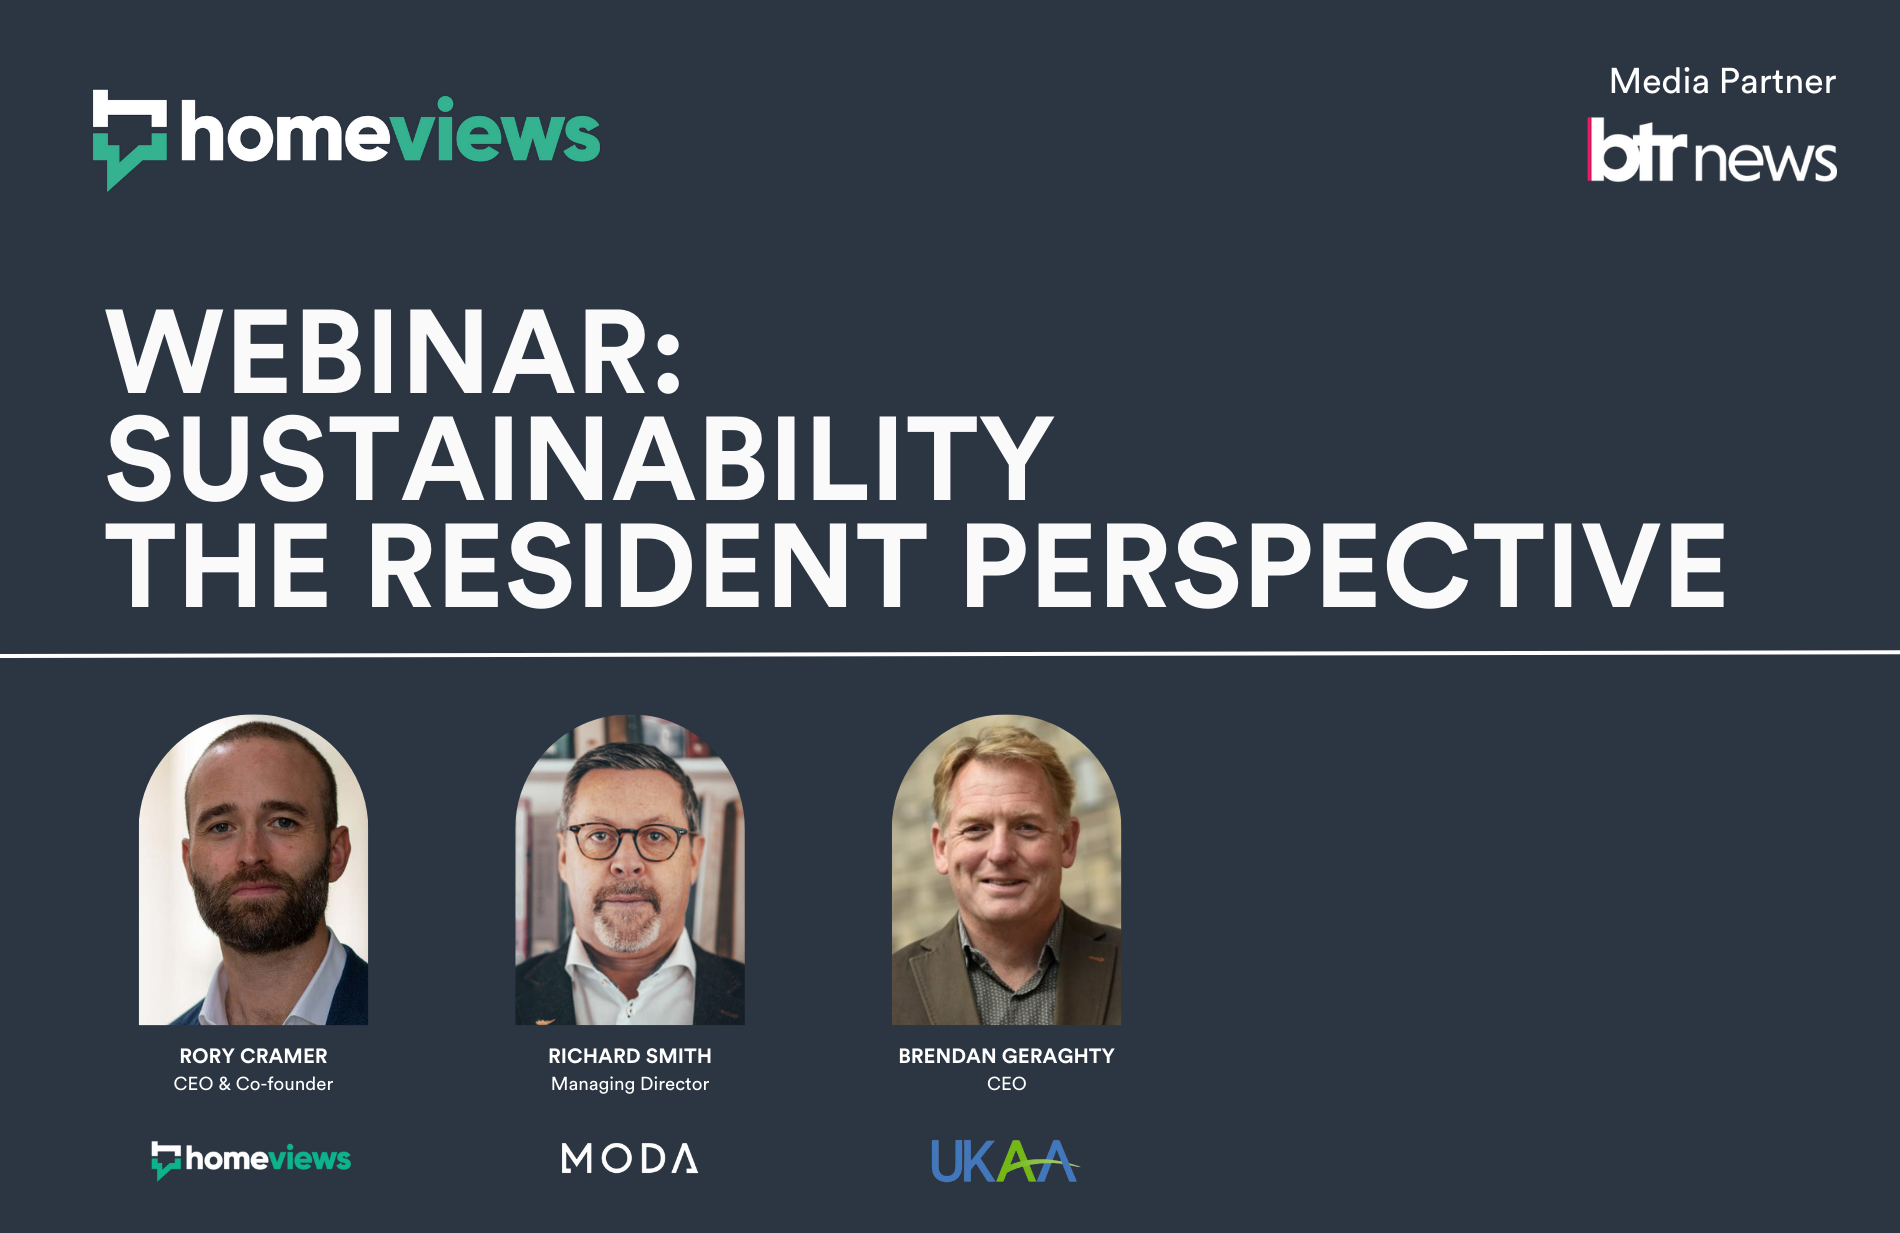 Cover image with text "Webinar: Sustainability, The Resident Perspective" and images of the three people taking part in webinar